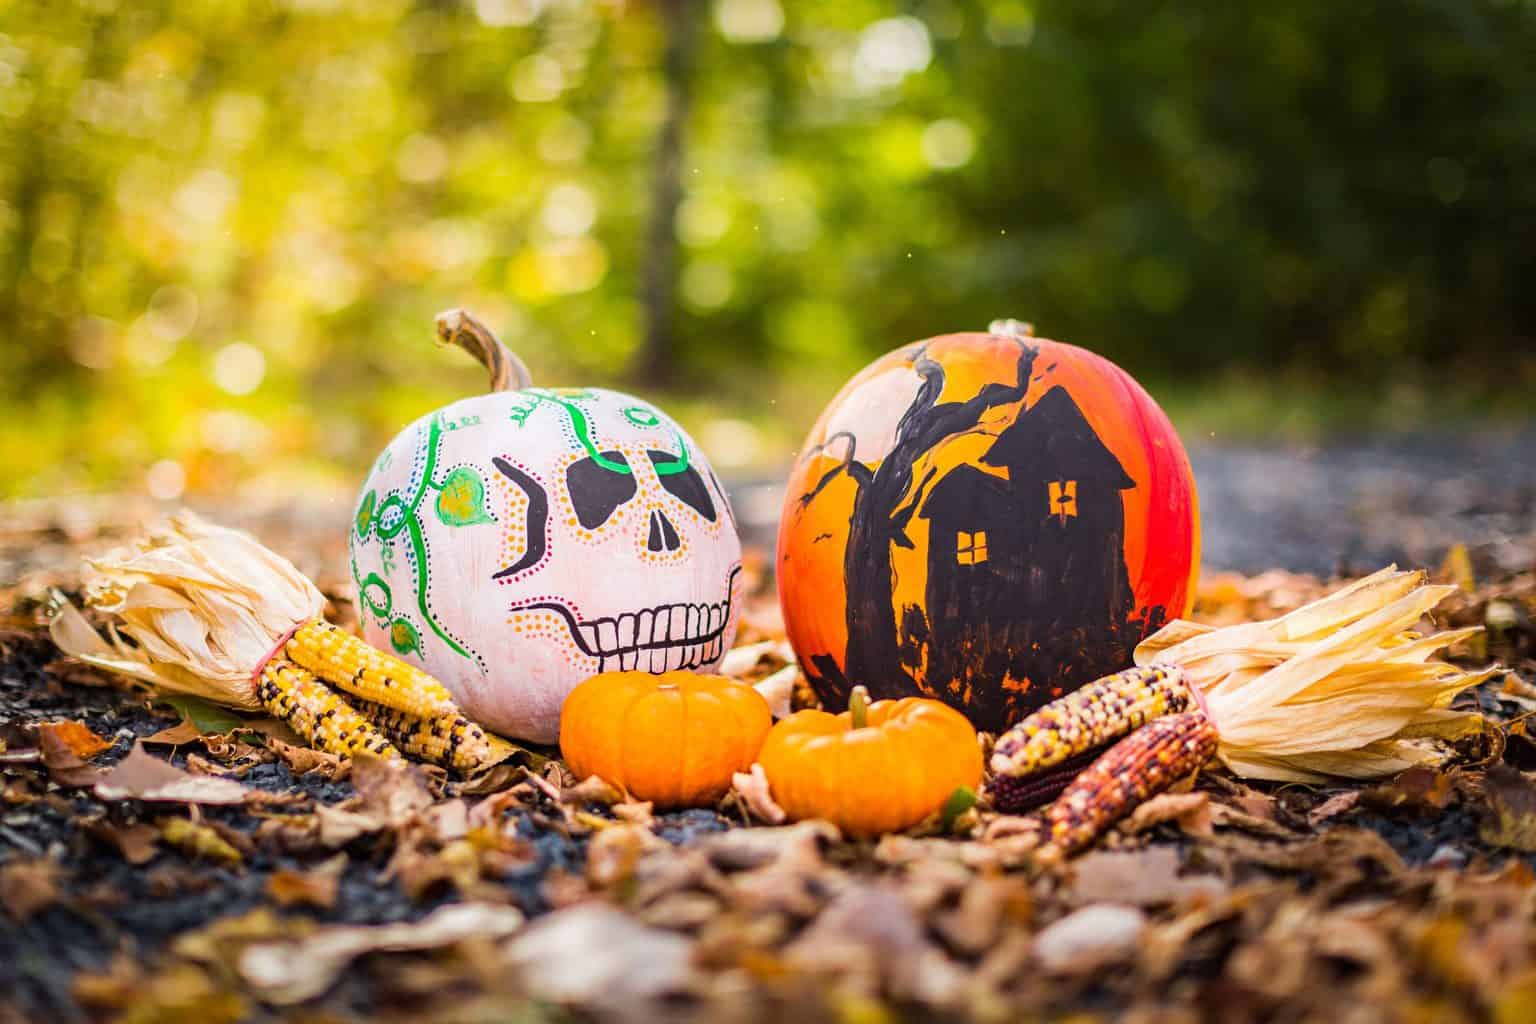 Two pumpkins painted with spooky images